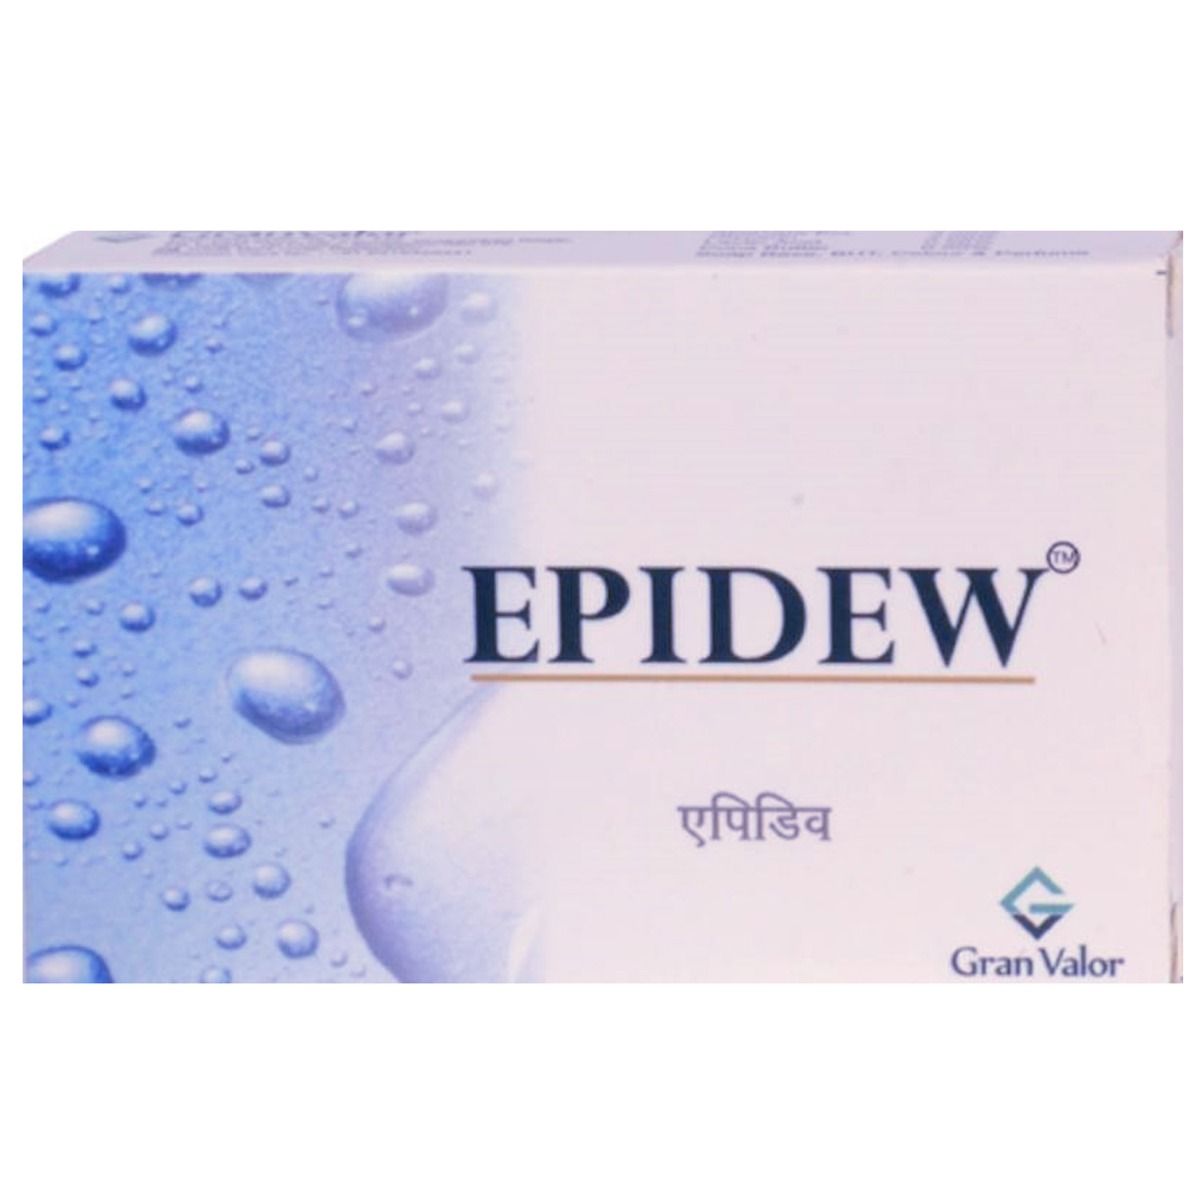 Epidew Soap, 75 gm, Pack of 1 